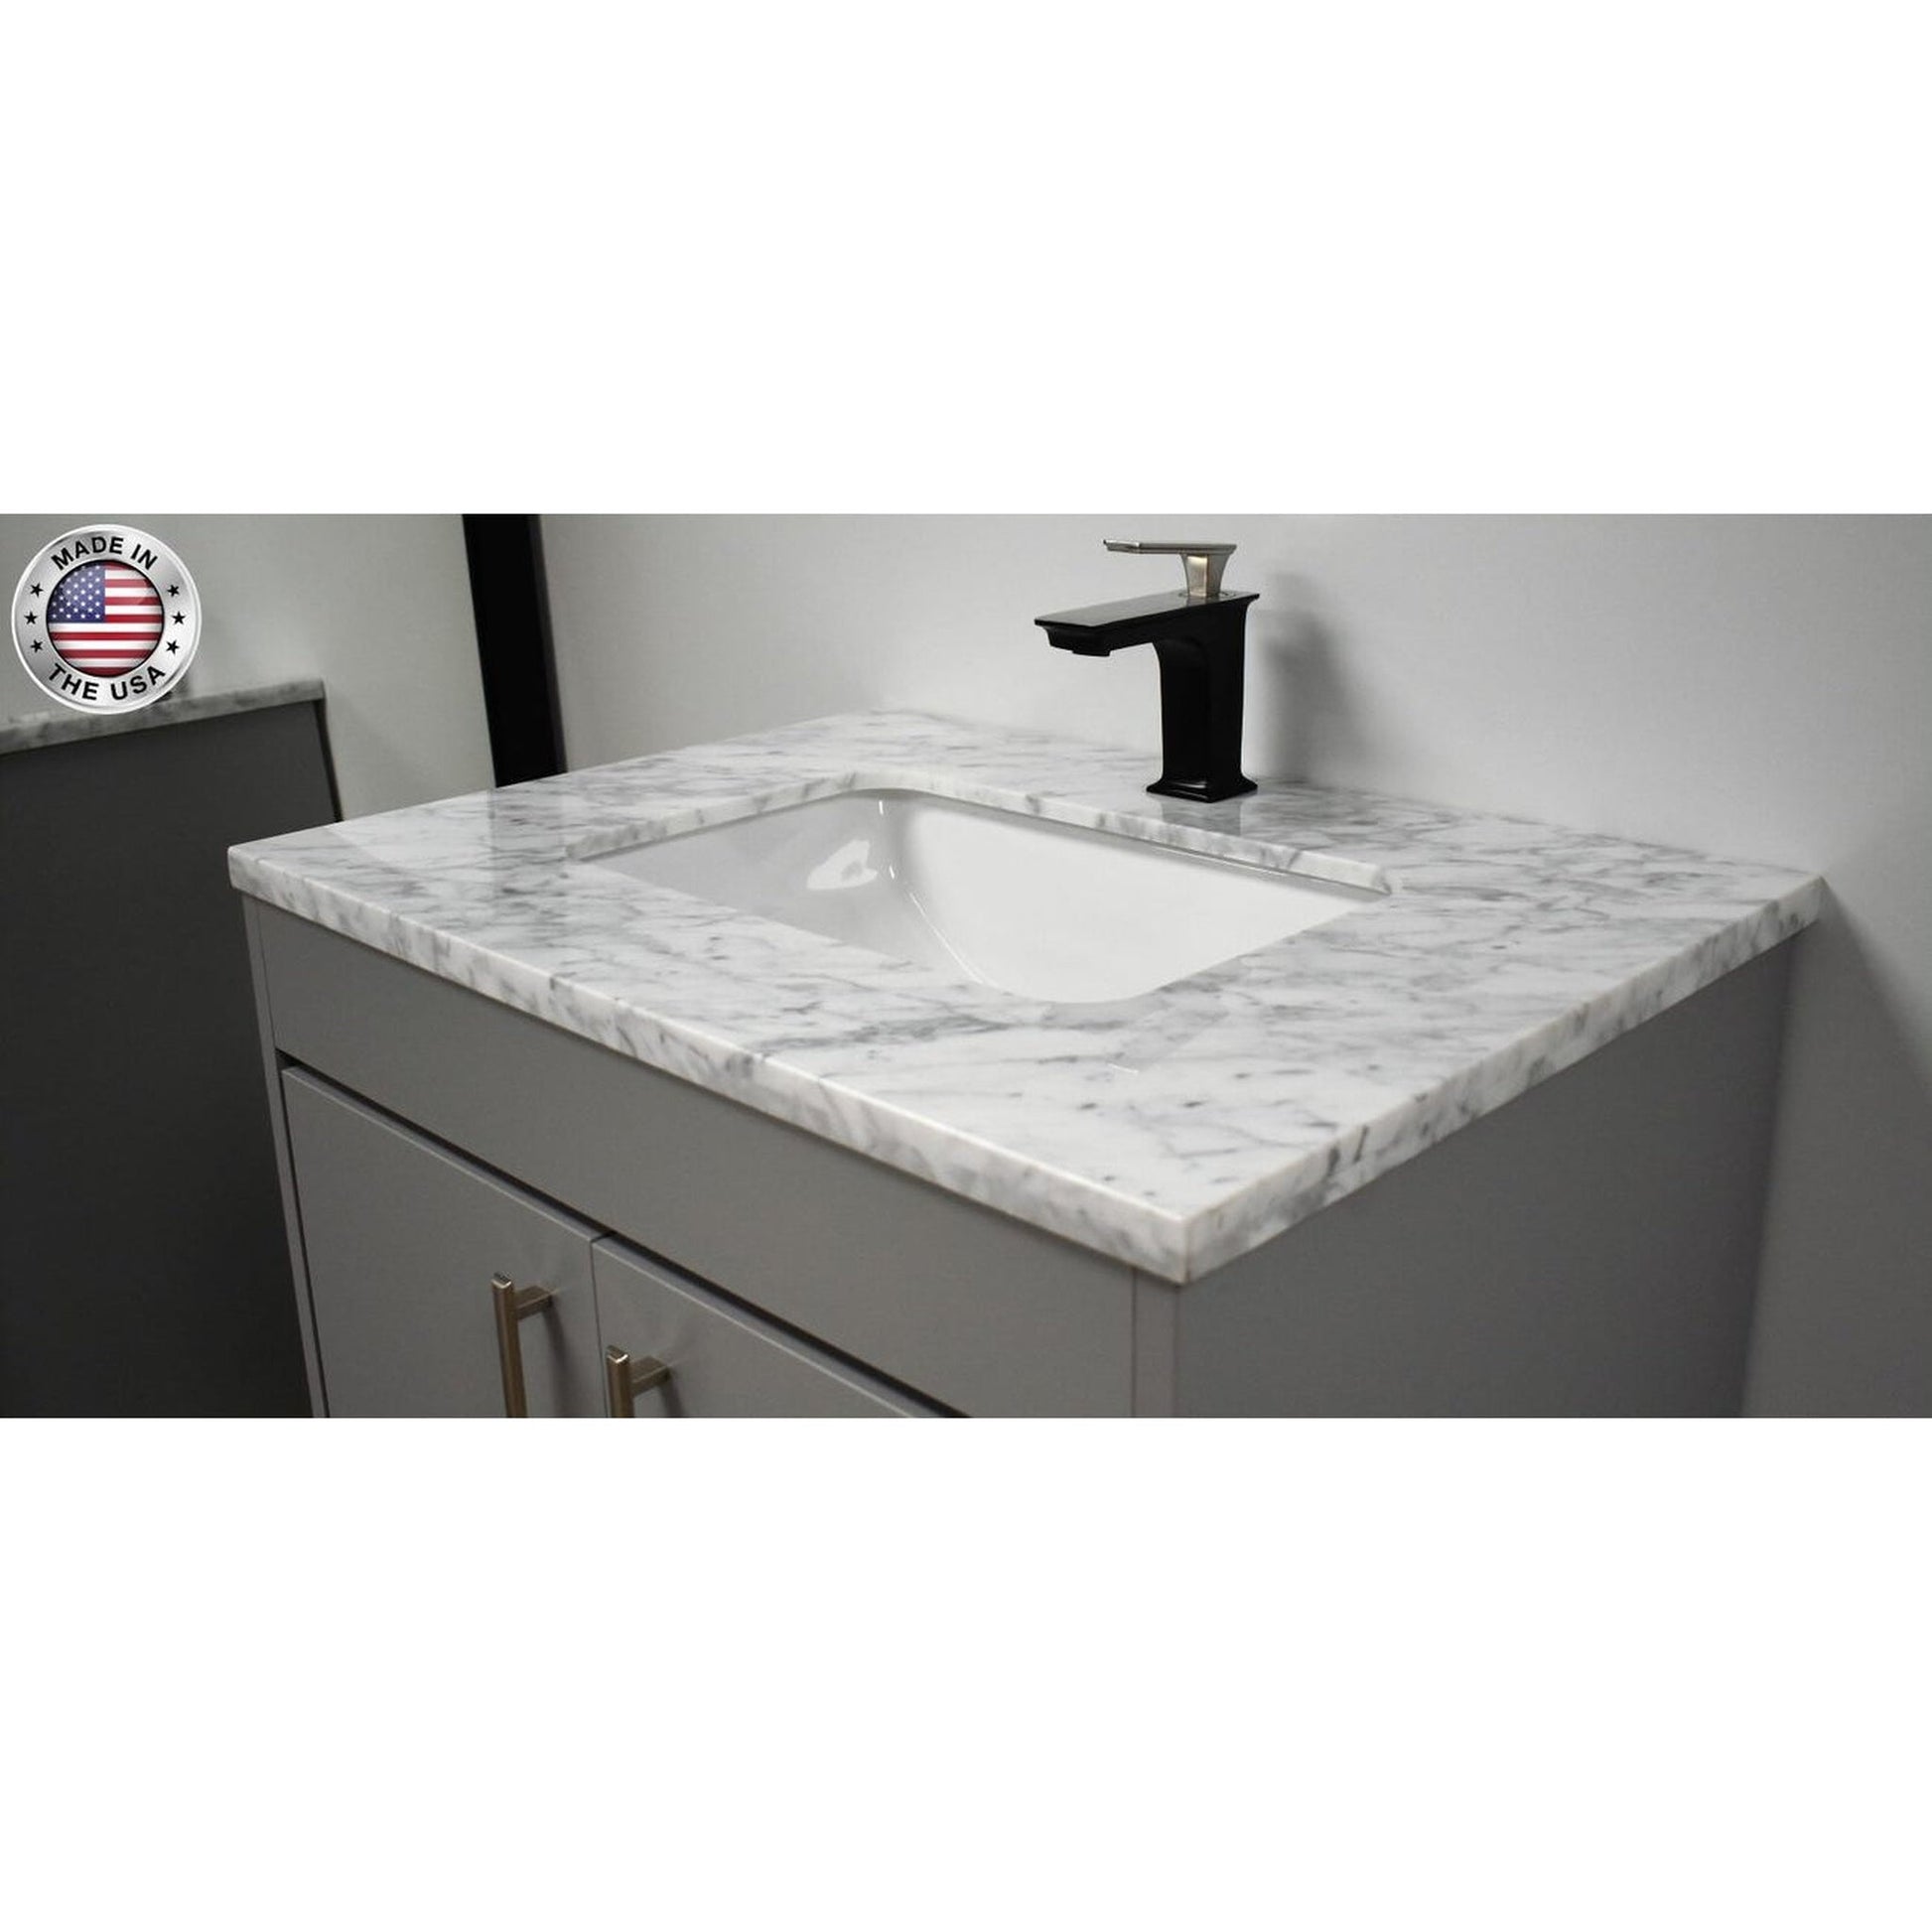 Volpa USA Capri 30" x 22" Gray Freestanding Modern Bathroom Vanity With Preinstalled Undermount Sink And Carrara Marble top With Brushed Nickel Edge Handles